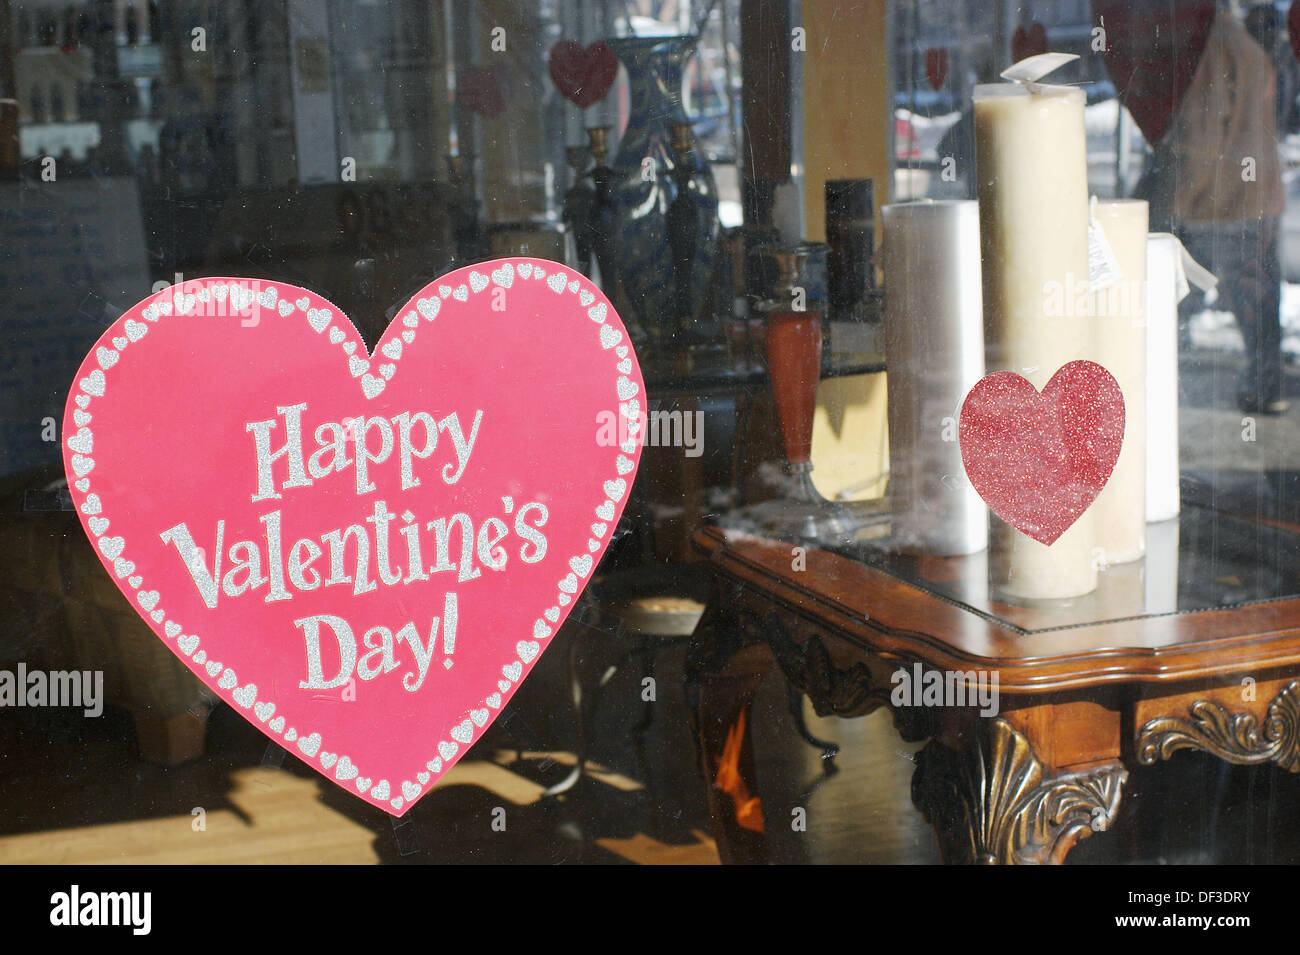 Happy Valentines Day Display Shop Window  Love Decorations Decals Stickers A395 